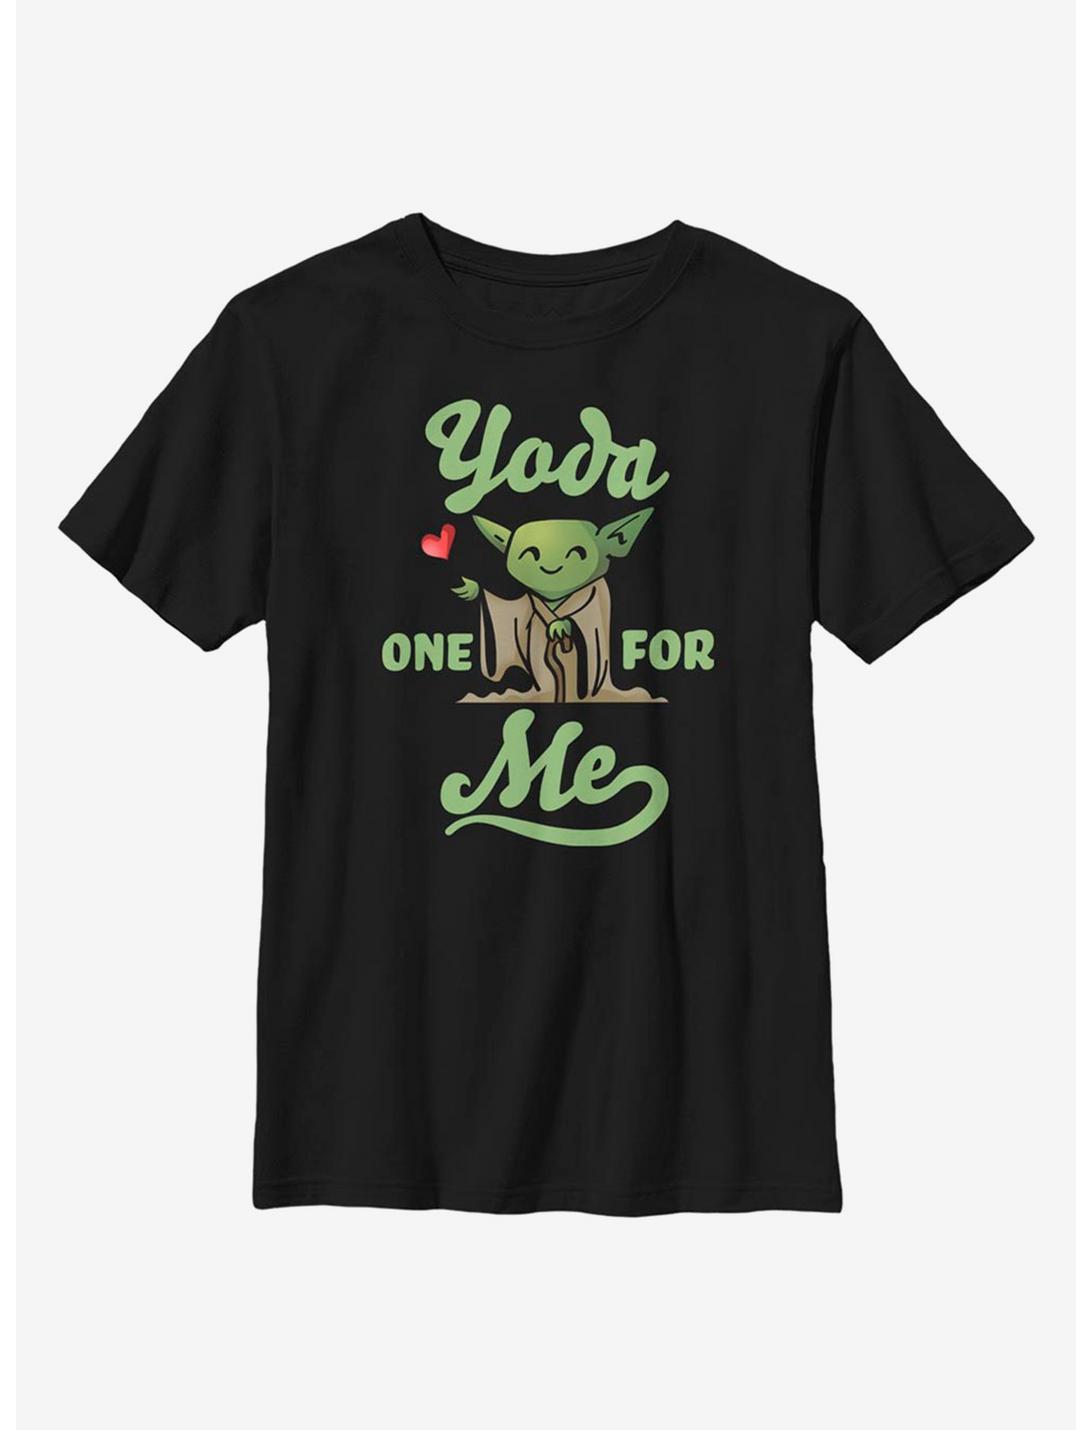 Star Wars Yoda One For Me Tiny Heart Youth T-Shirt, BLACK, hi-res